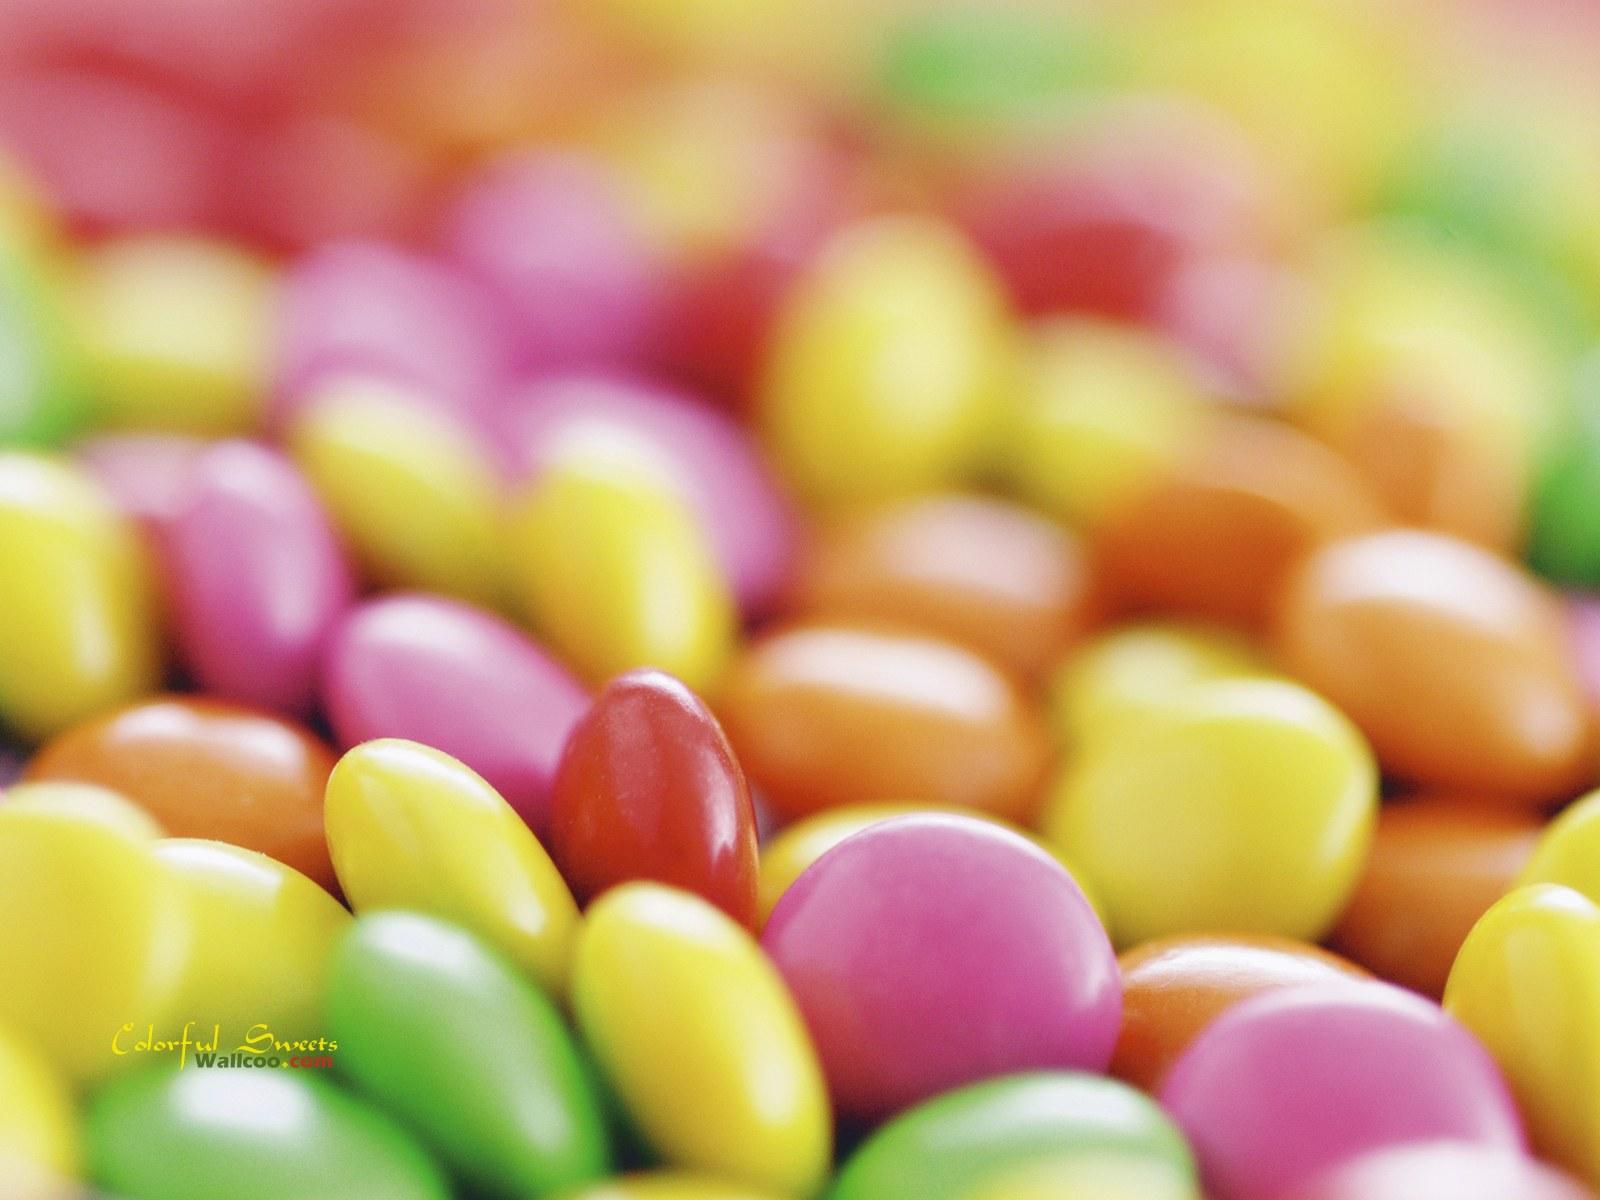 Colorful Sweet Candies wallpaperx1200